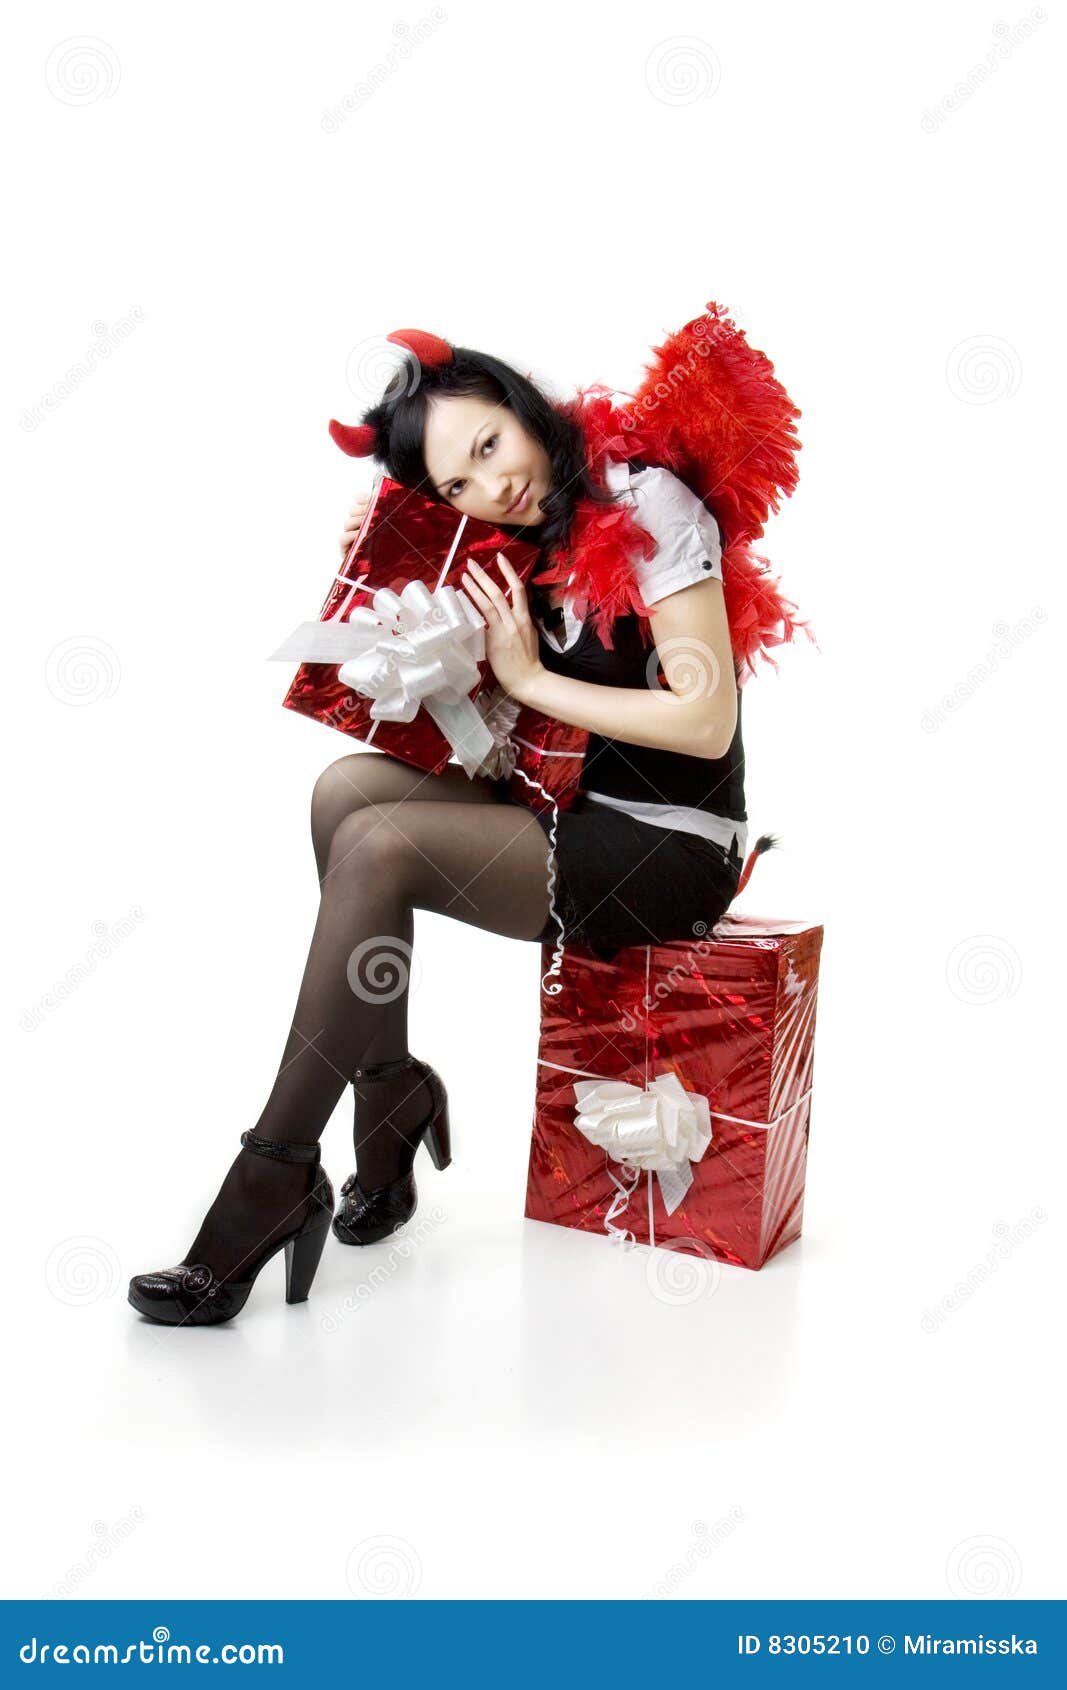 Picture of a girl in a devil costume with a gift